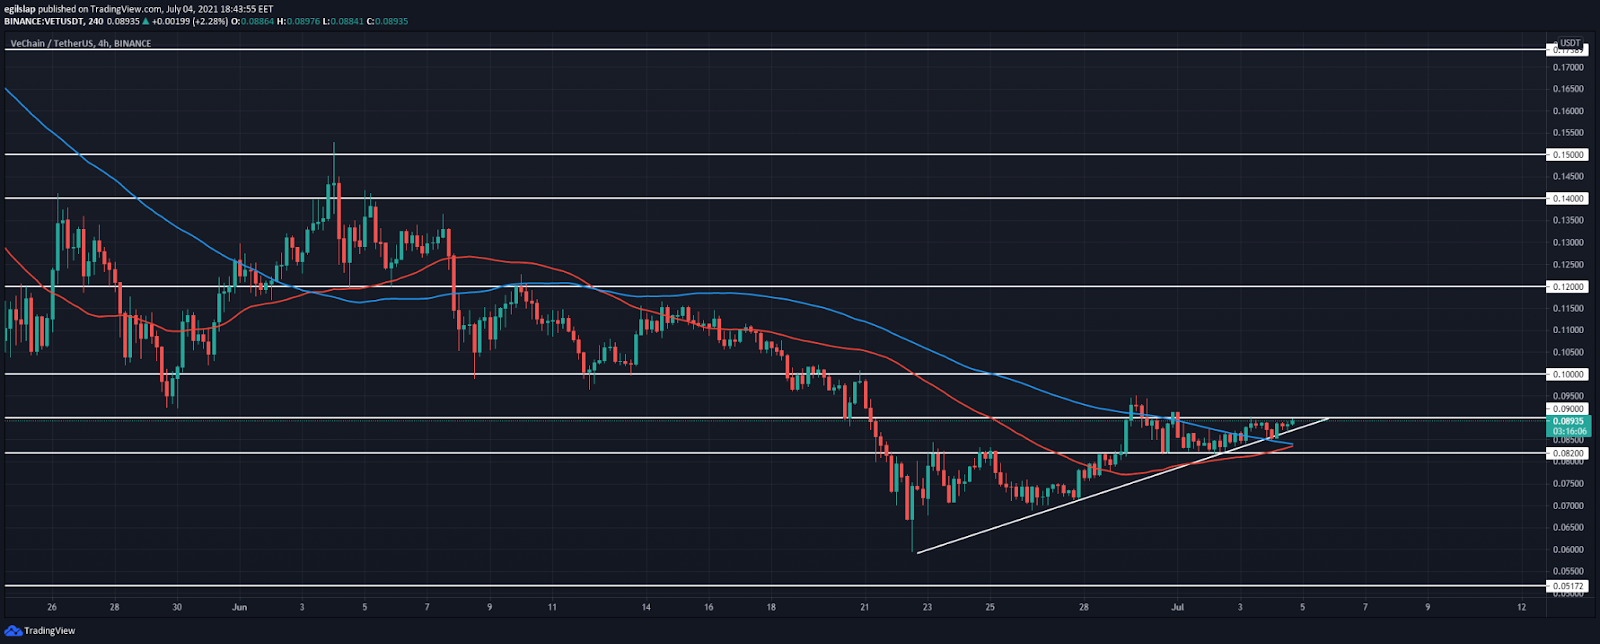 VeChain price analysis: VET approached $0.09 resistance, ready to break higher?